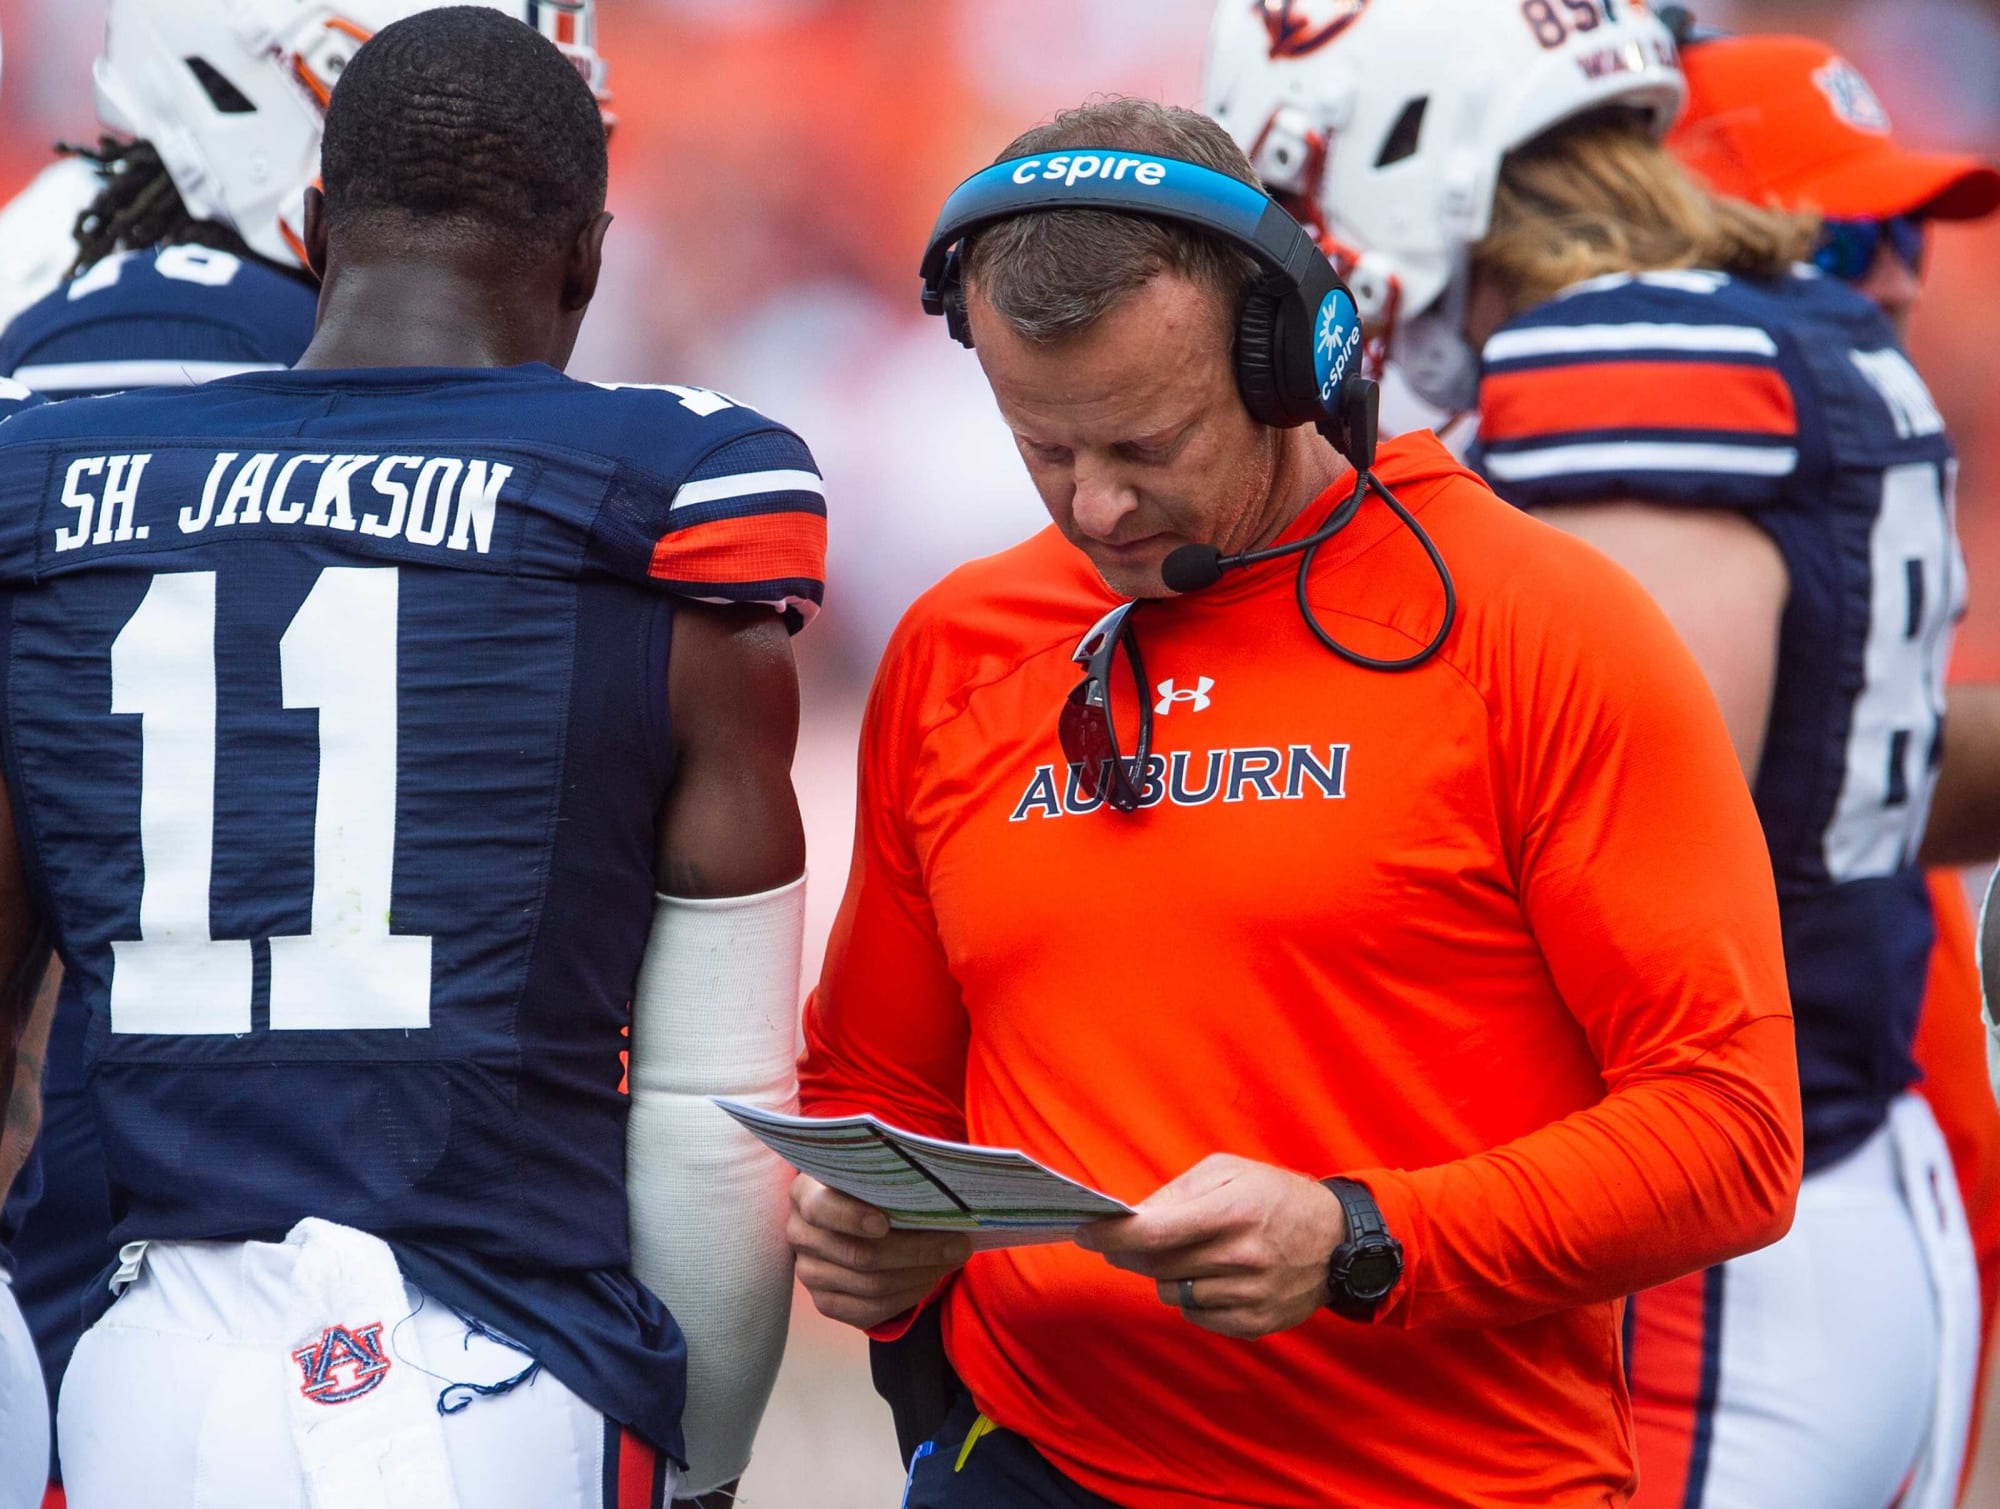 Auburn fans ready to help pay Bryan Harsin's buyout after being blown out